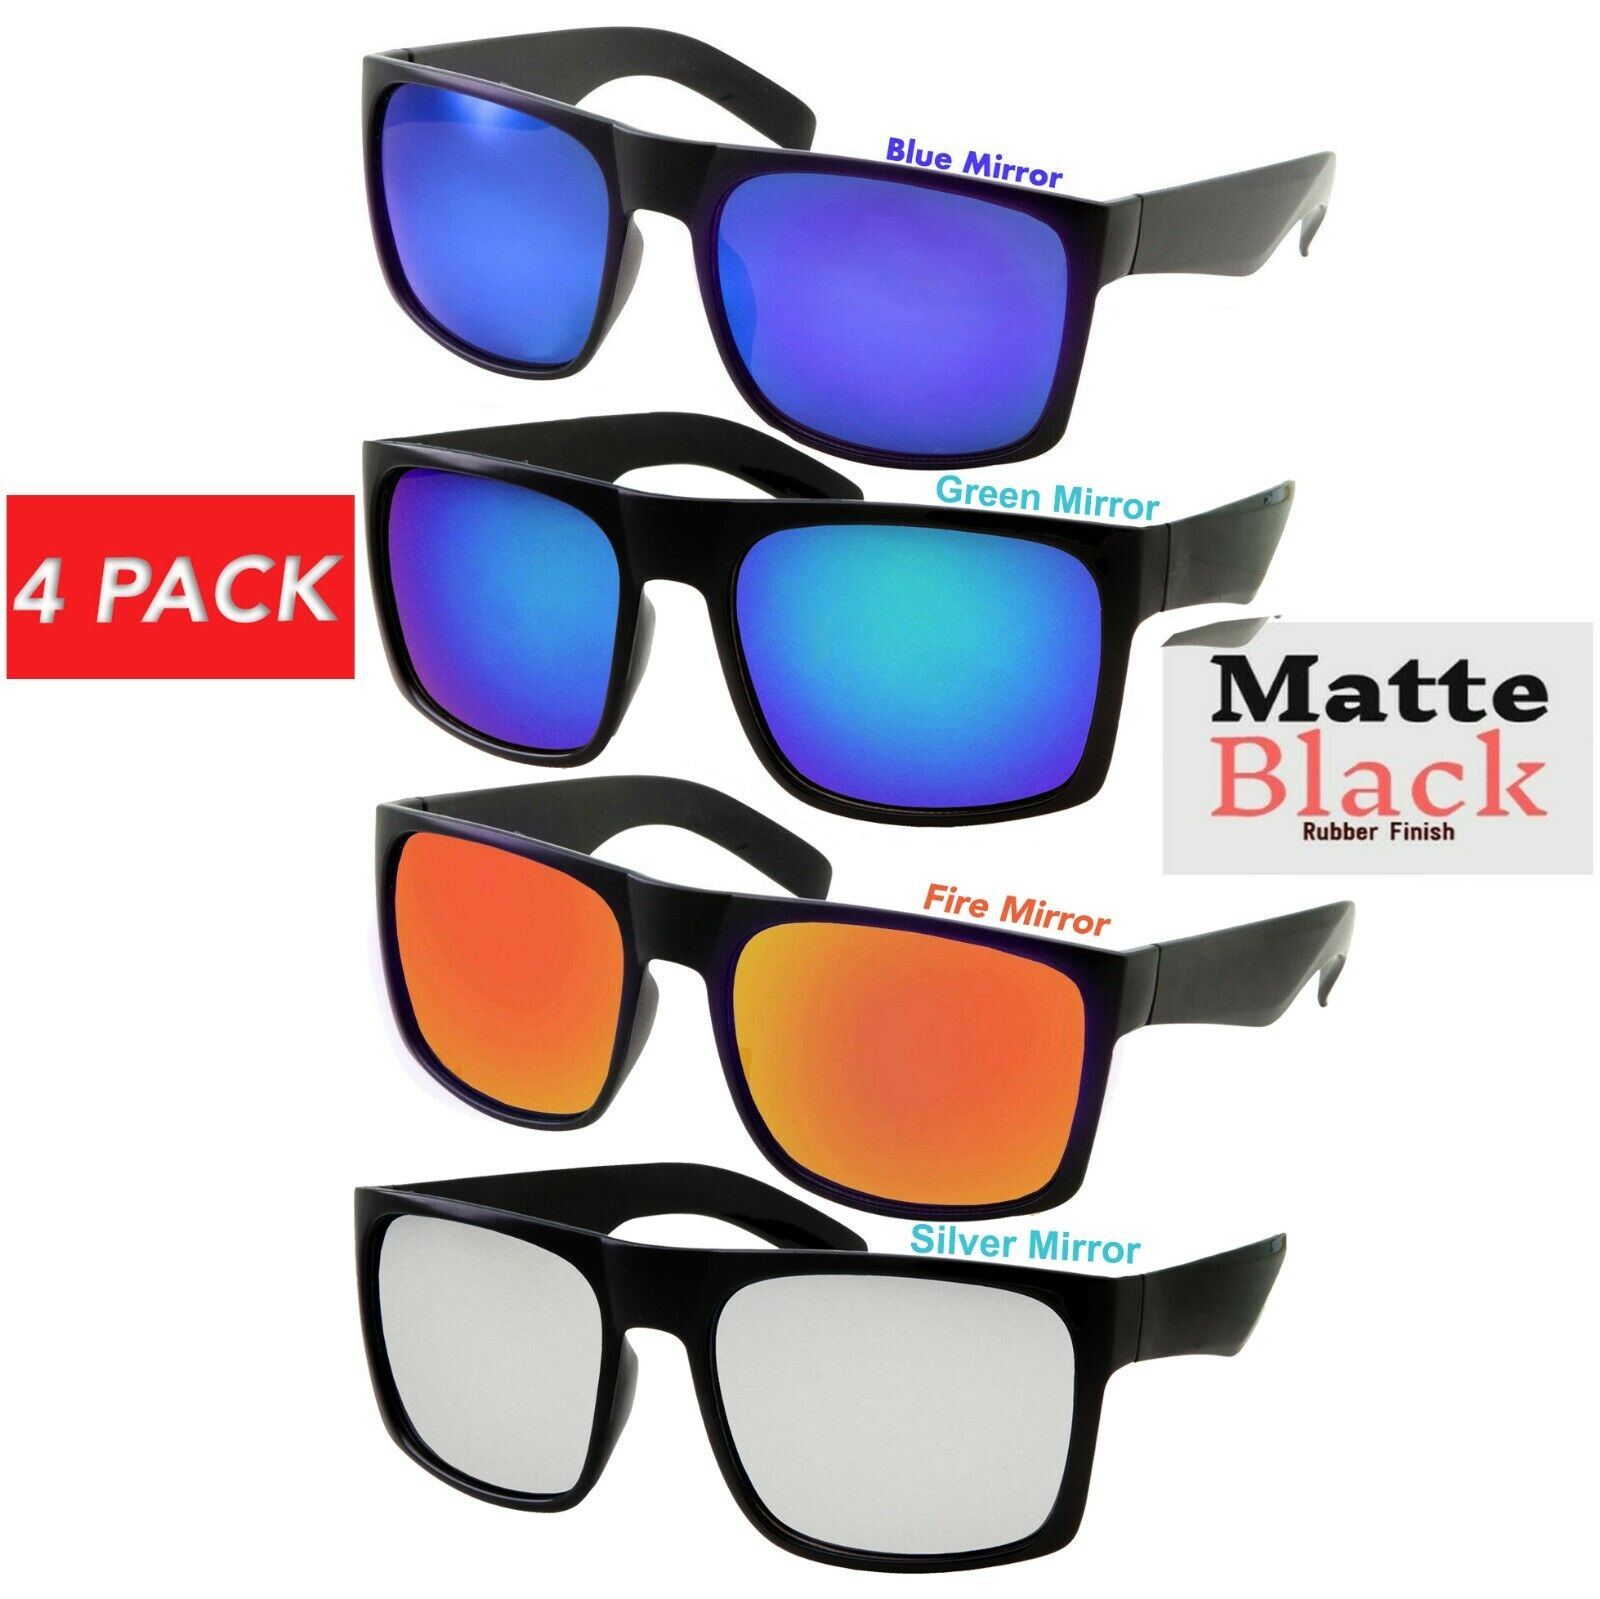 4 Pack XL Men's SUNGLASSES WIDE Big Head Mirror Matte BLACK Extra Large Unbranded Does Not Apply